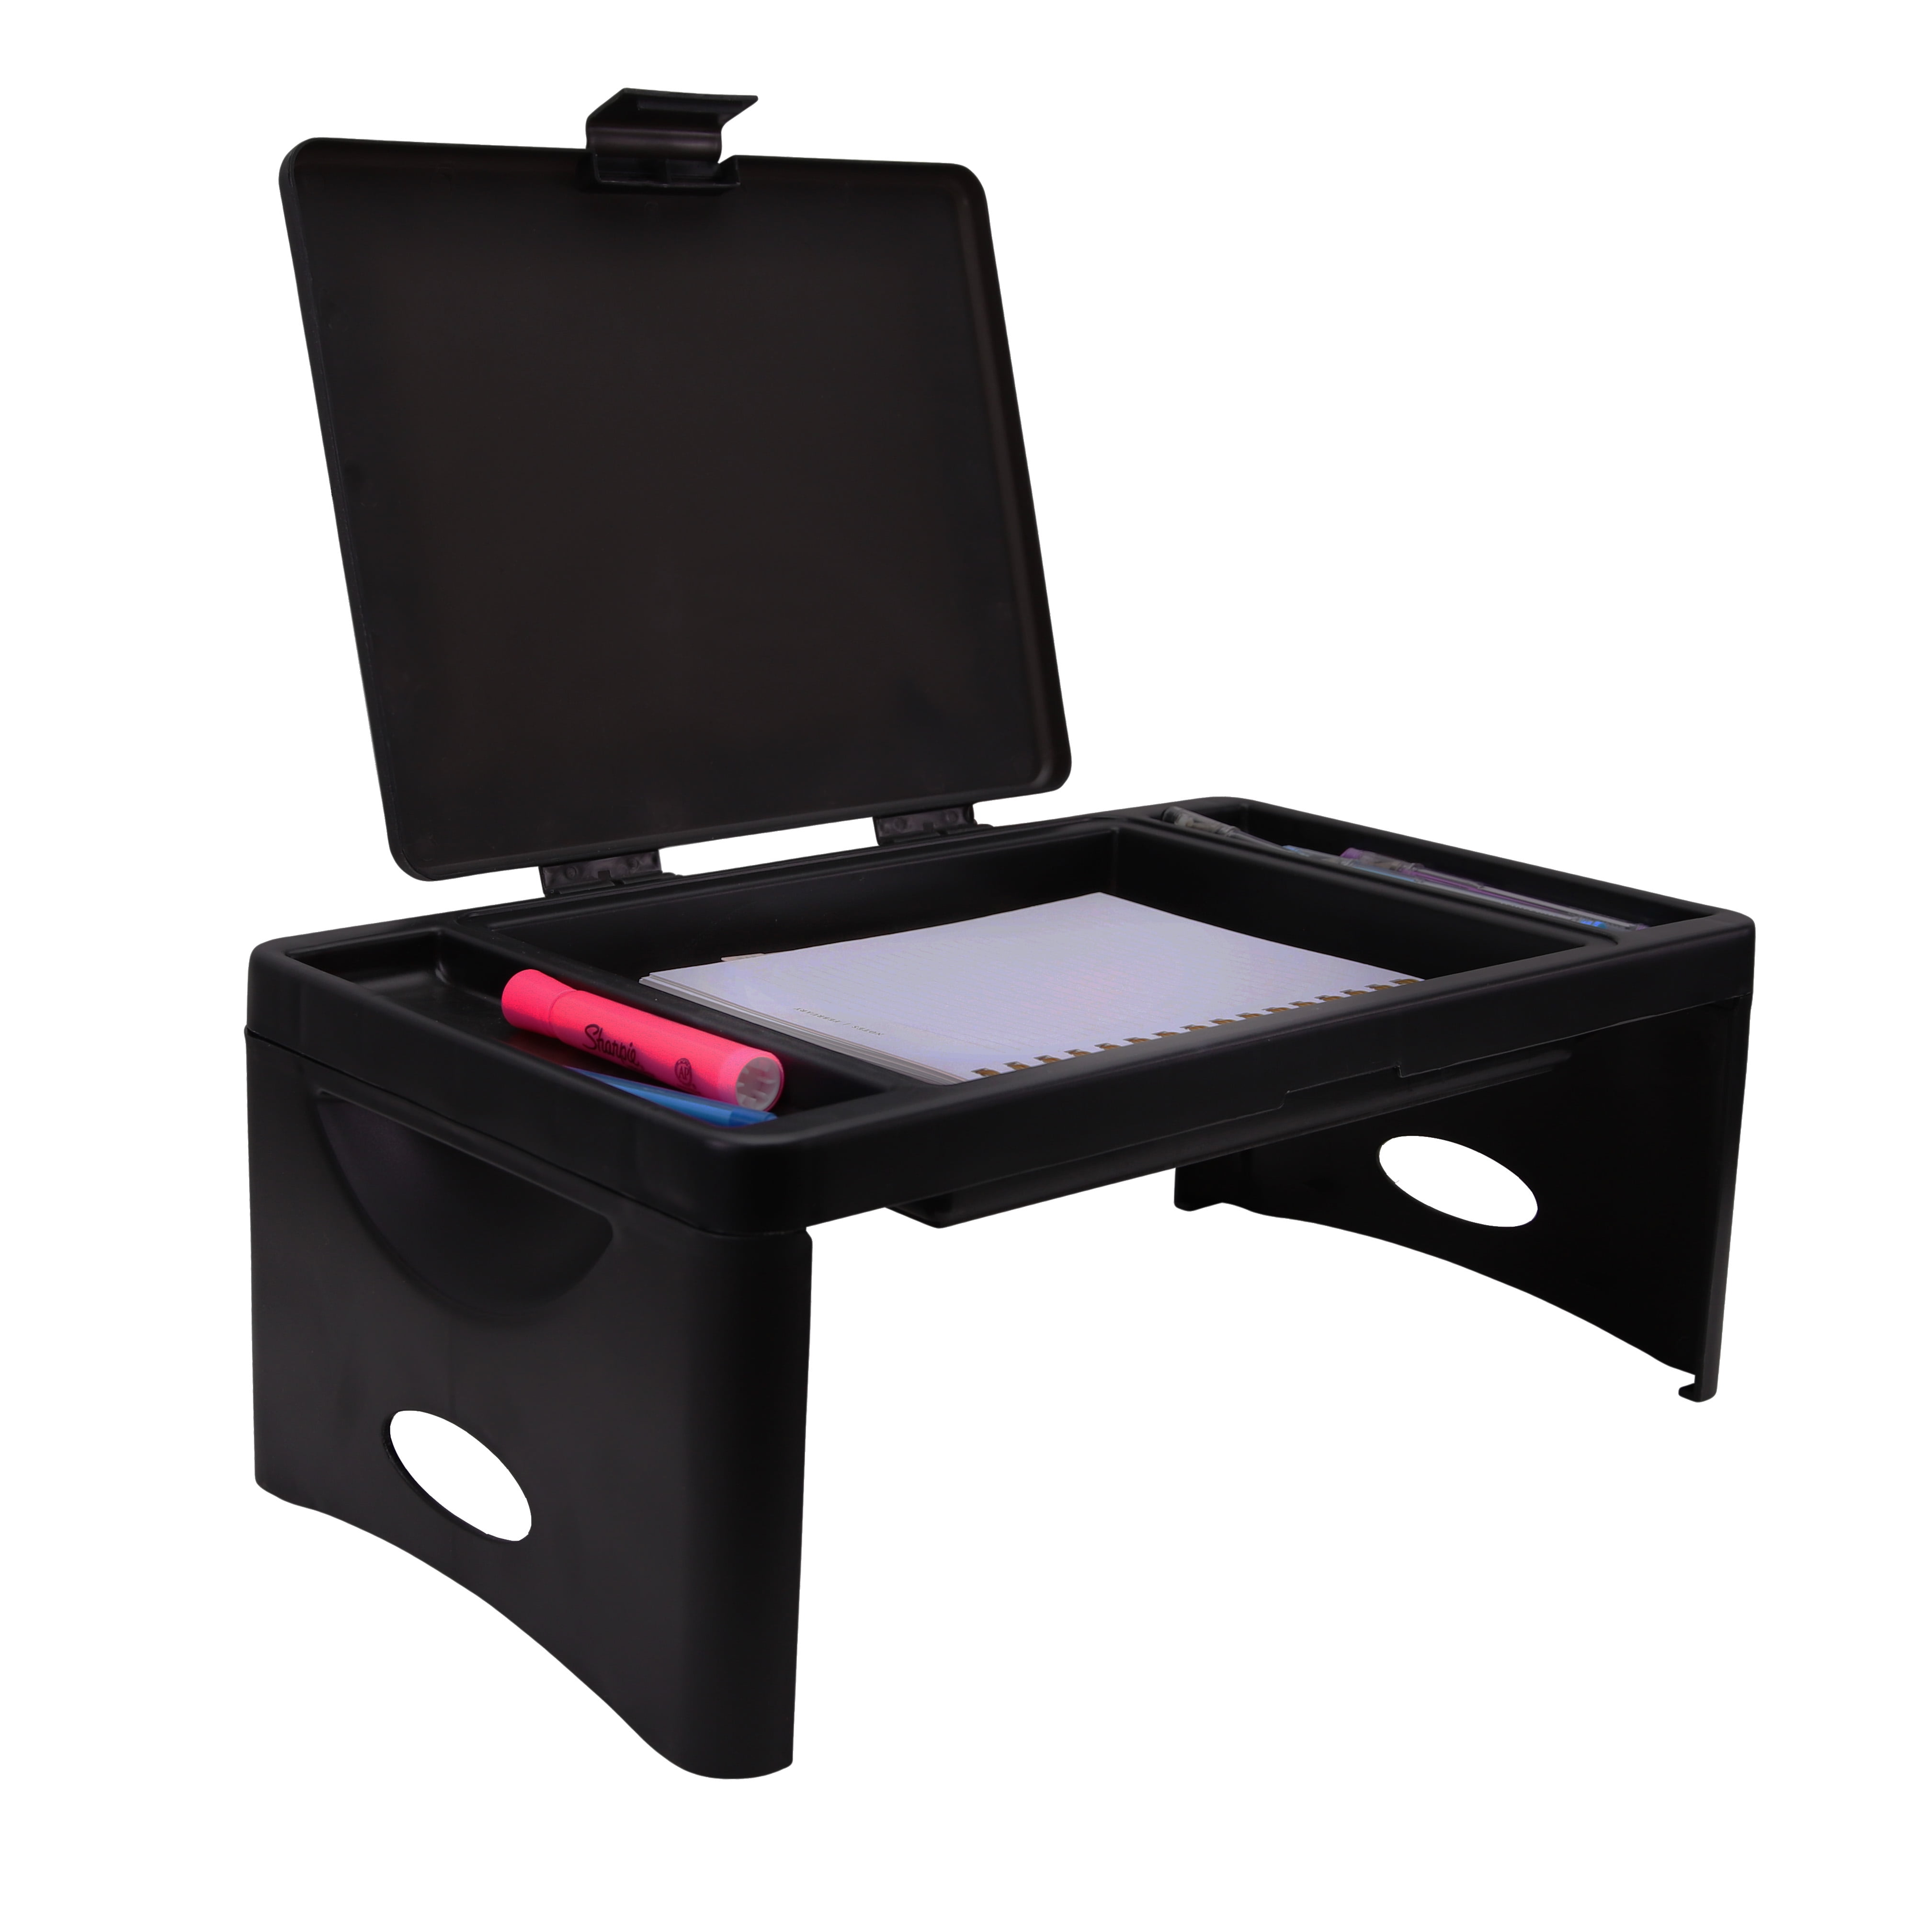 Gaming and Much More! Travel Foldable Lap Desk with Storage Pocket Breakfast in Bed Perfect use for Laptops 